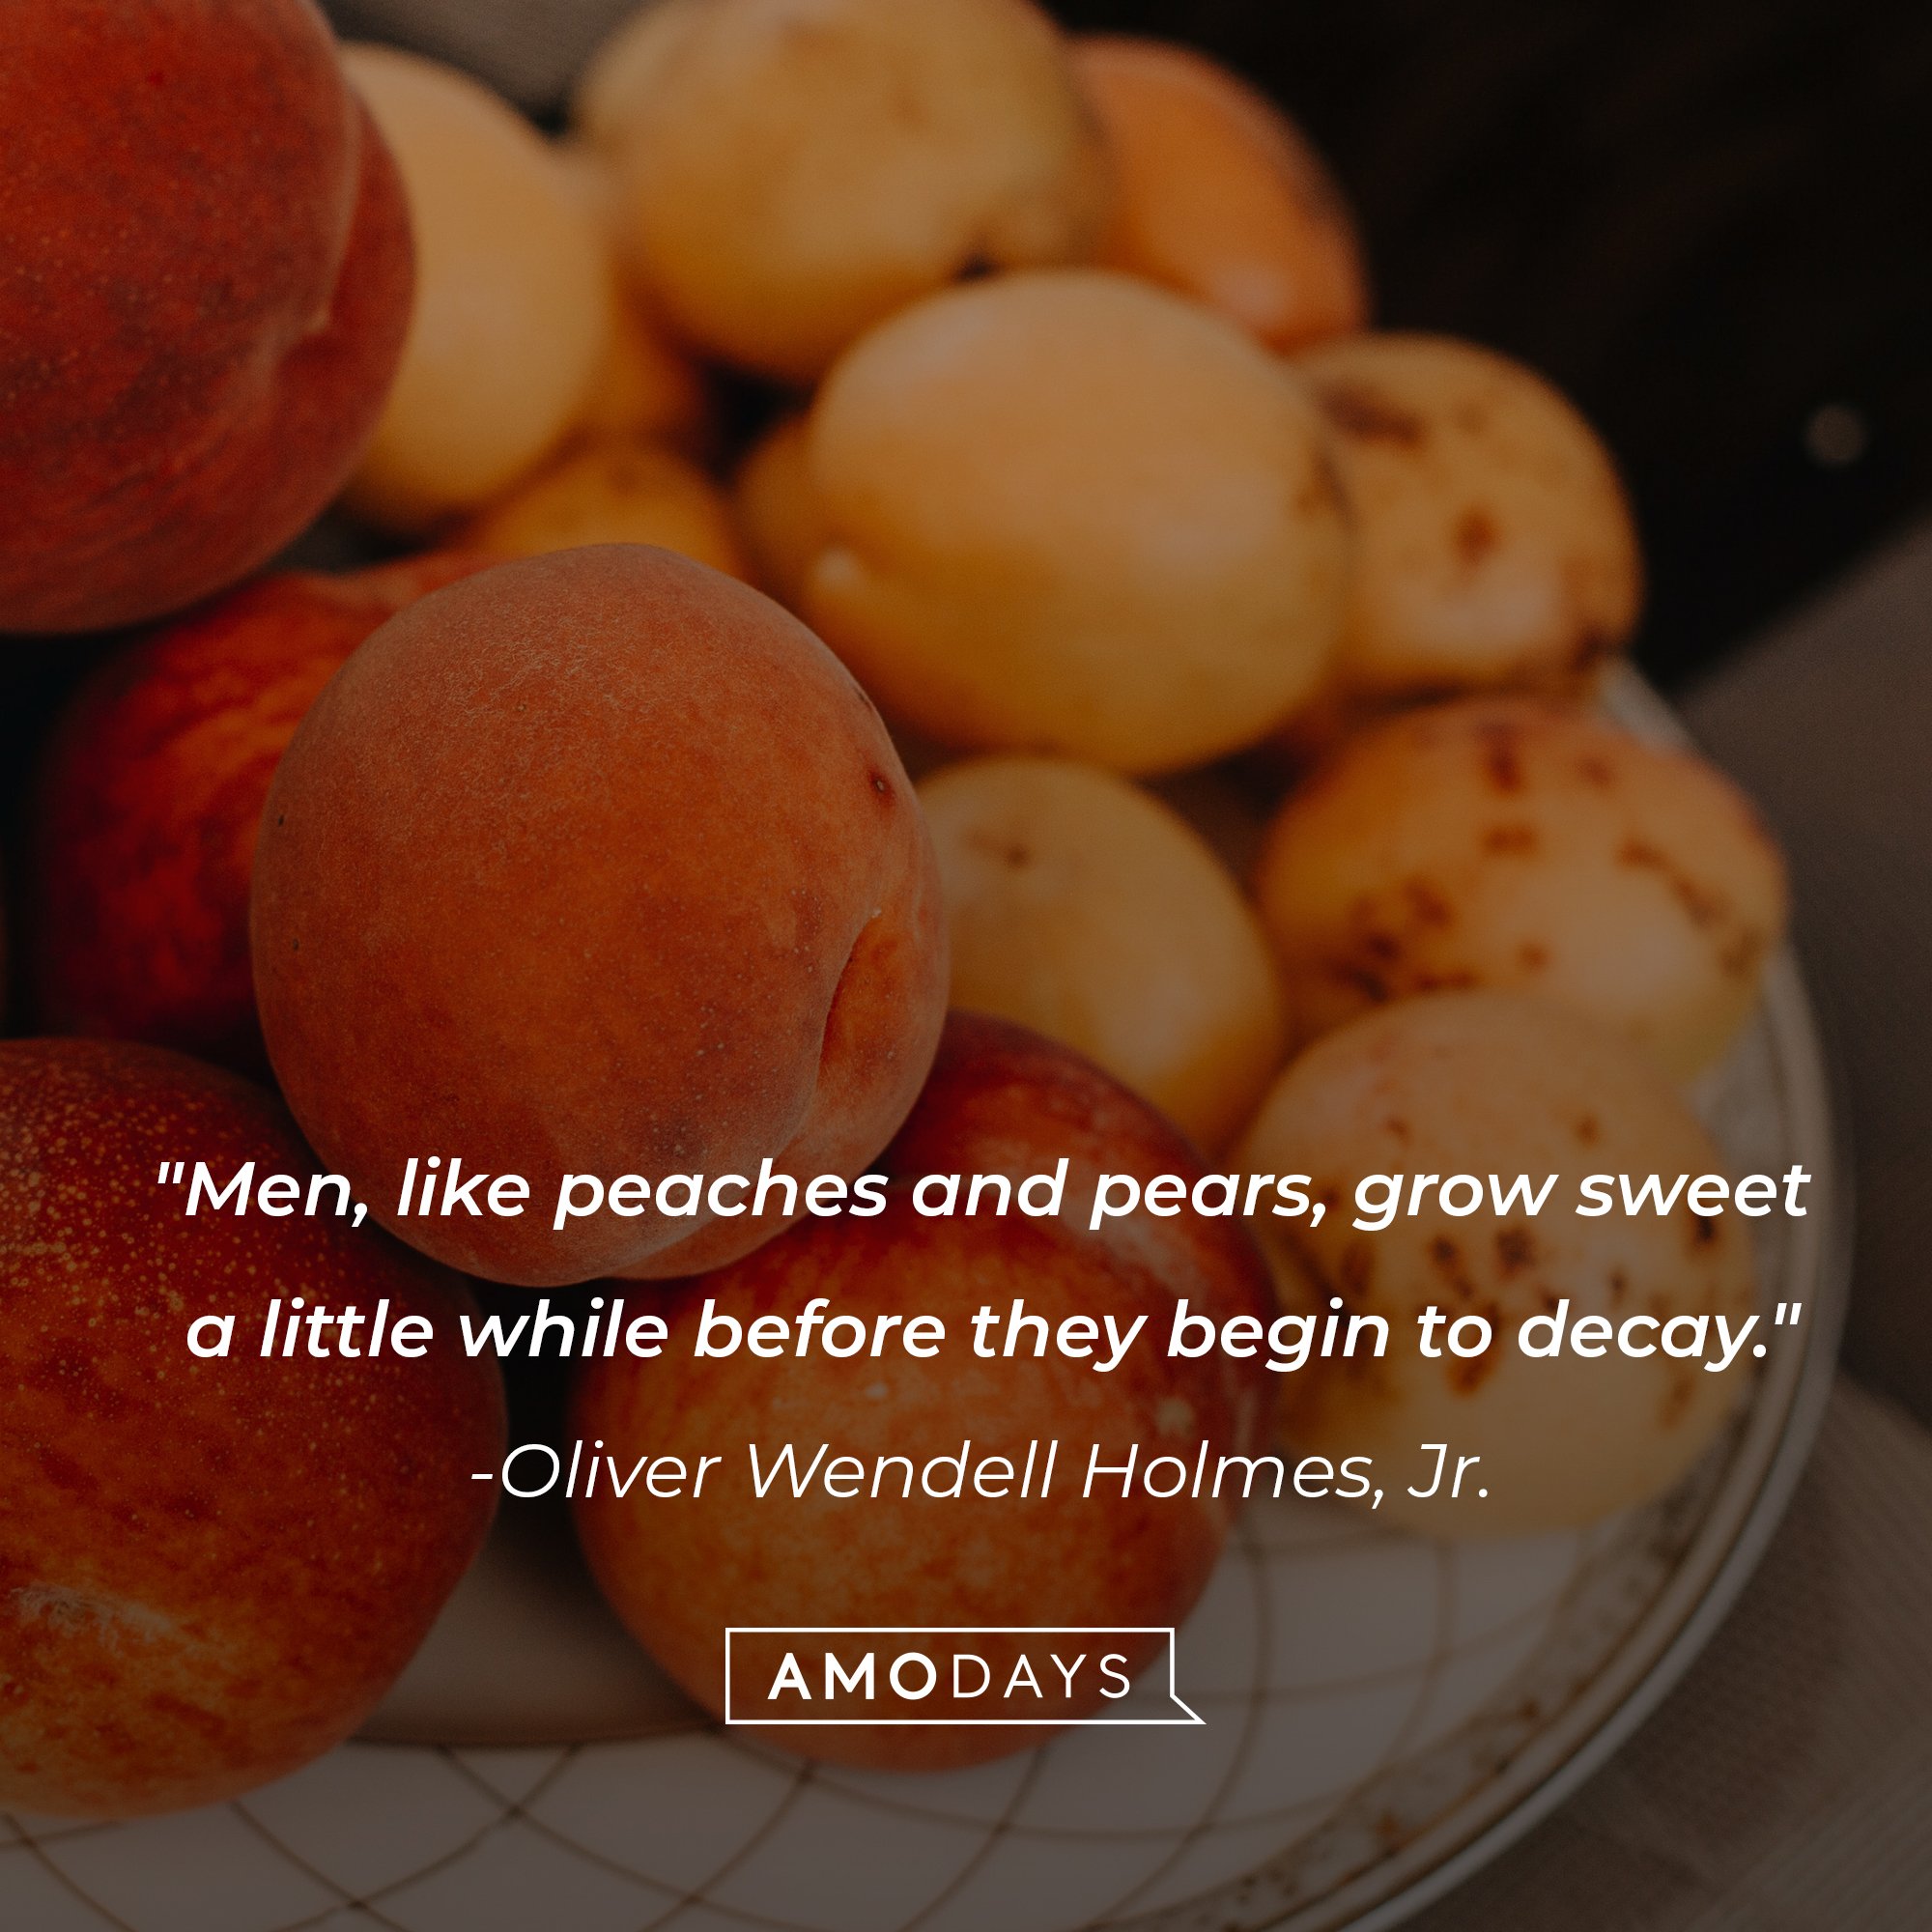 Oliver Wendell Holmes, Jr.'s quote: "Men, like peaches and pears, grow sweet a little while before they begin to decay." | Image: AmoDays